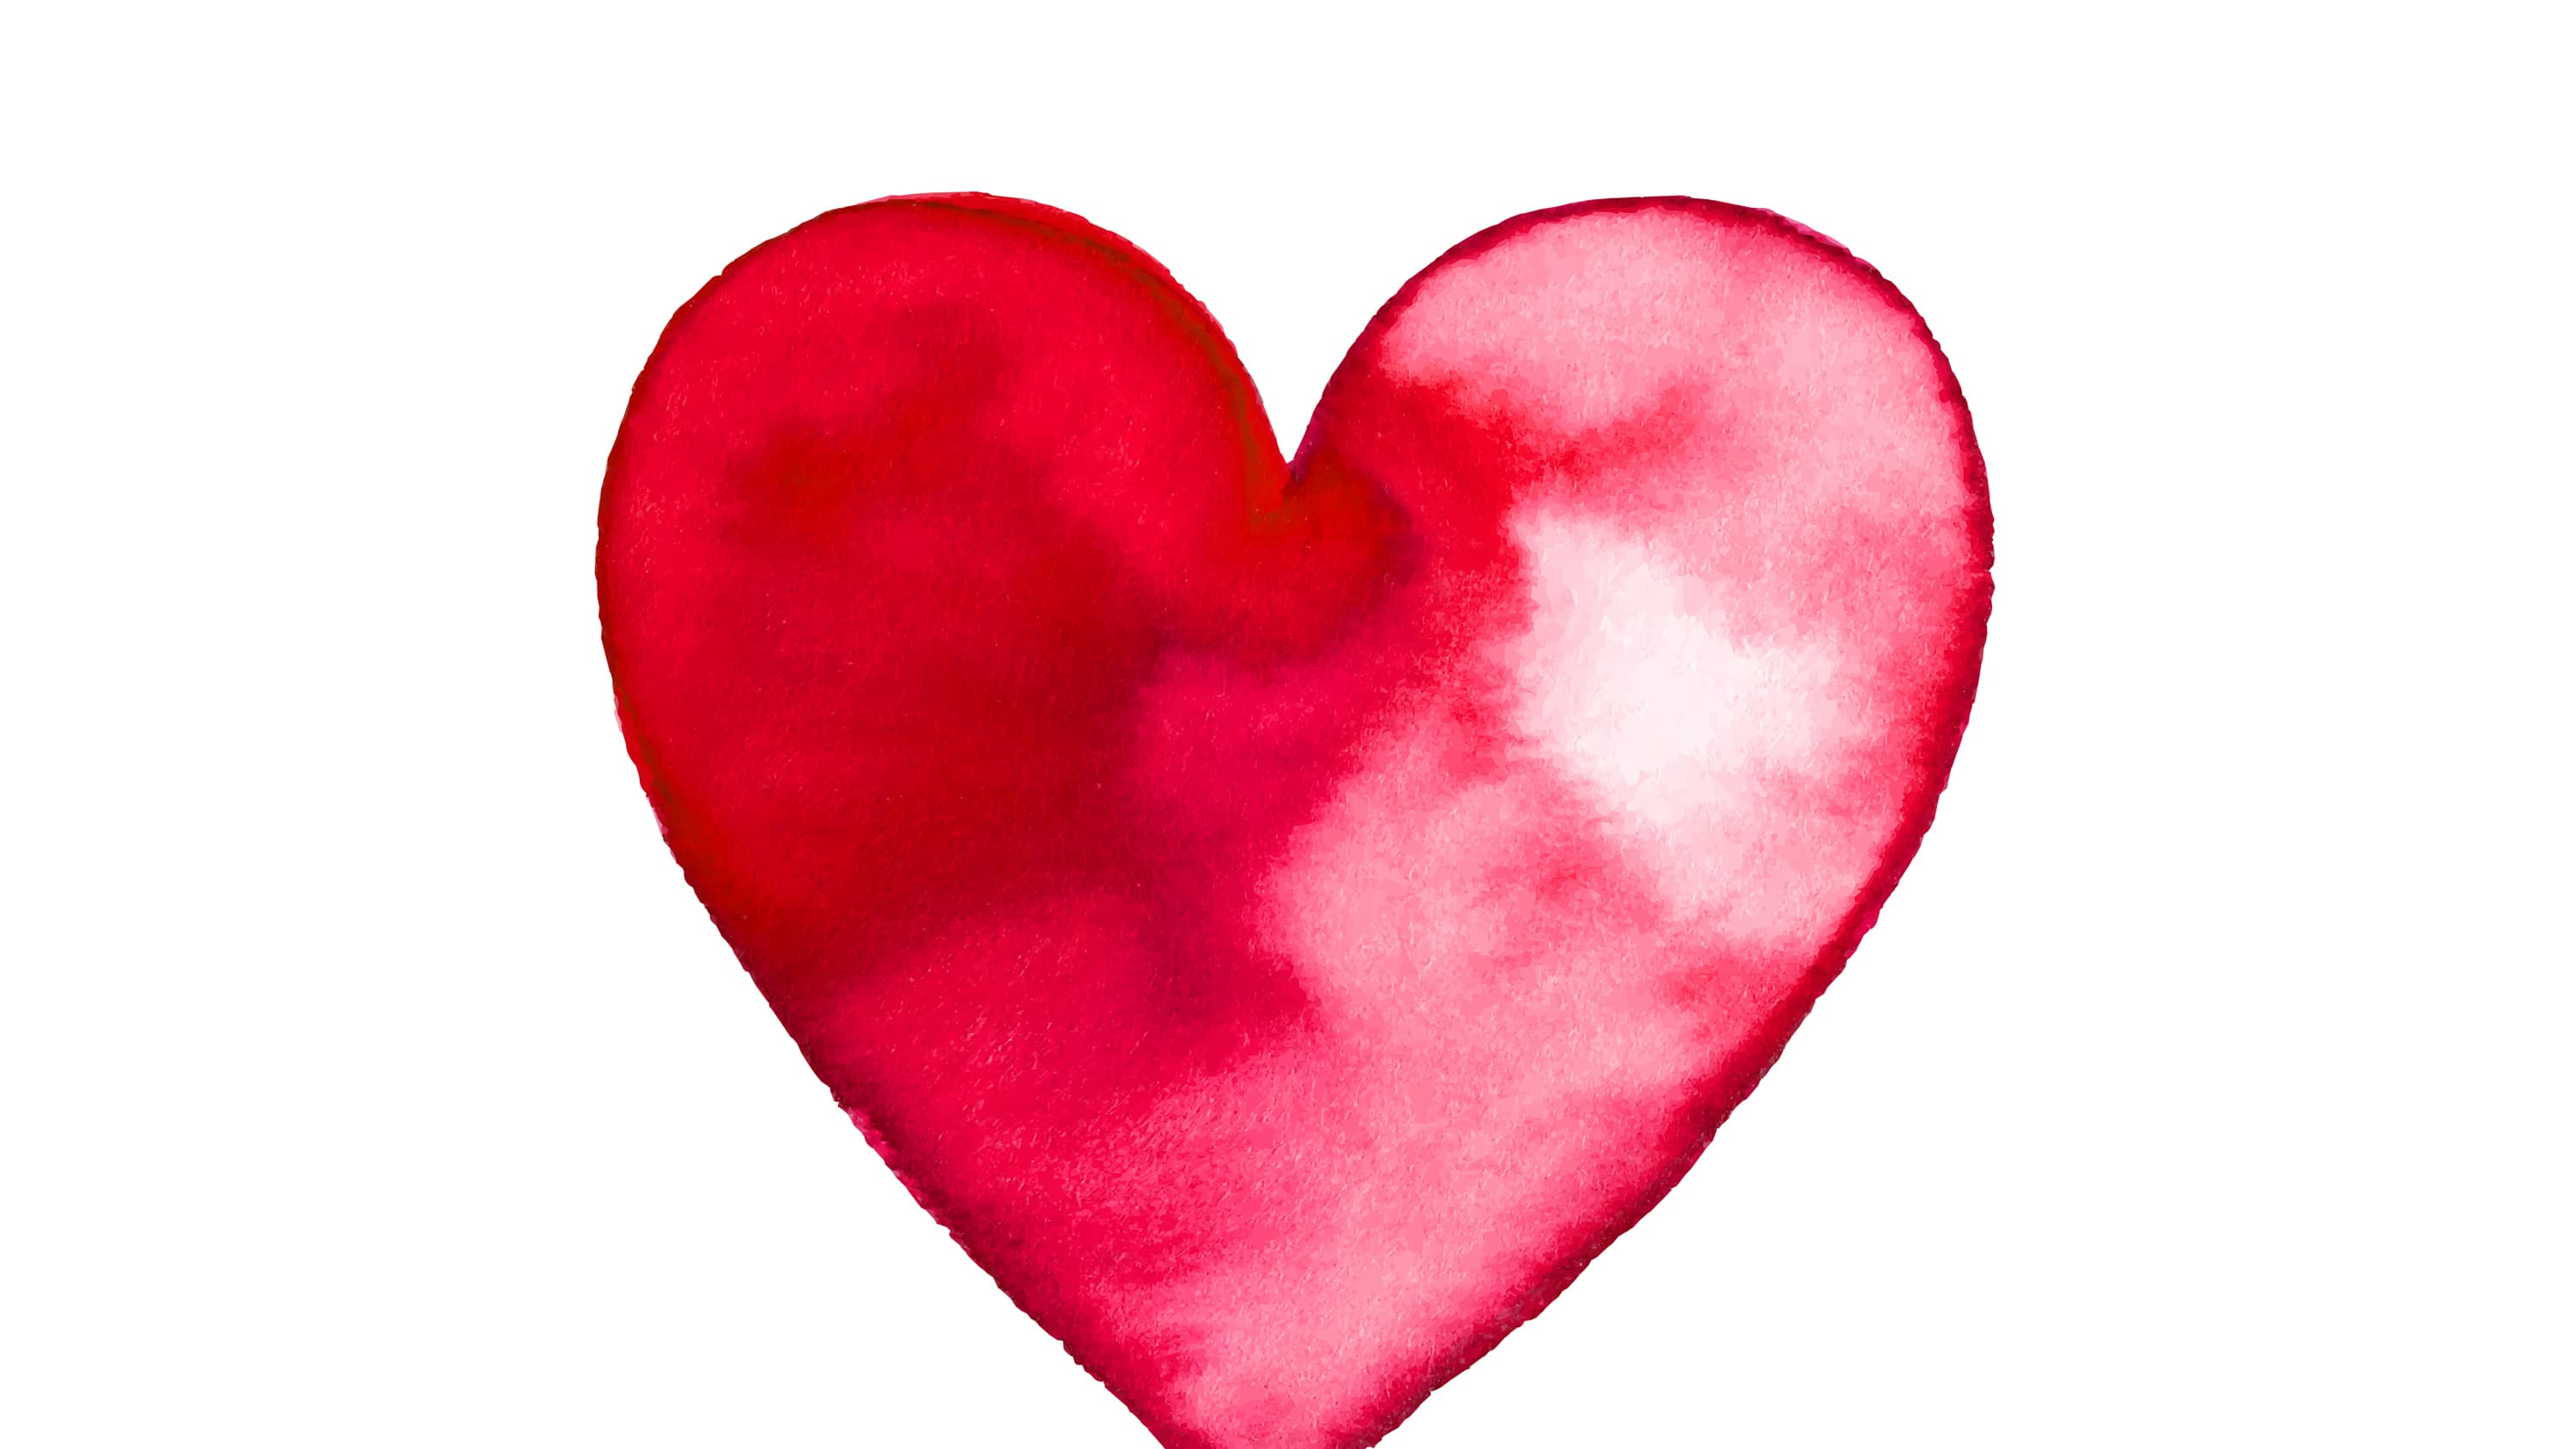 water color painting of a heart, to represent how men and women experience heart disease differently